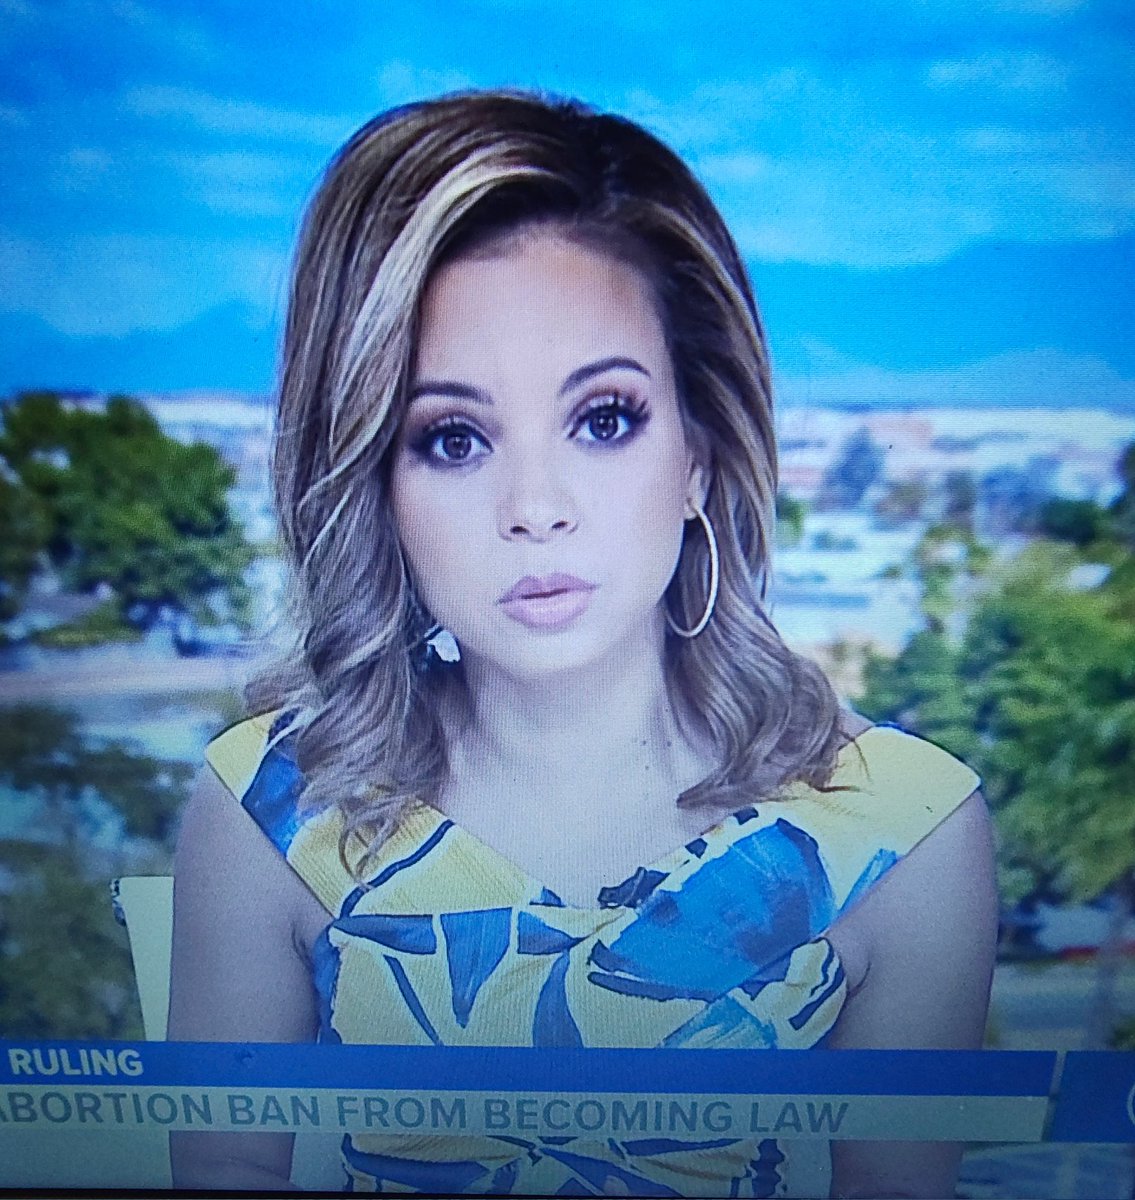 @CaribeDevine #happymonday #greatvibes to start the week! Awesome job anchoring #12newsaz and so gorgeous. Have a great day!! 👍❤️❤️😍😍